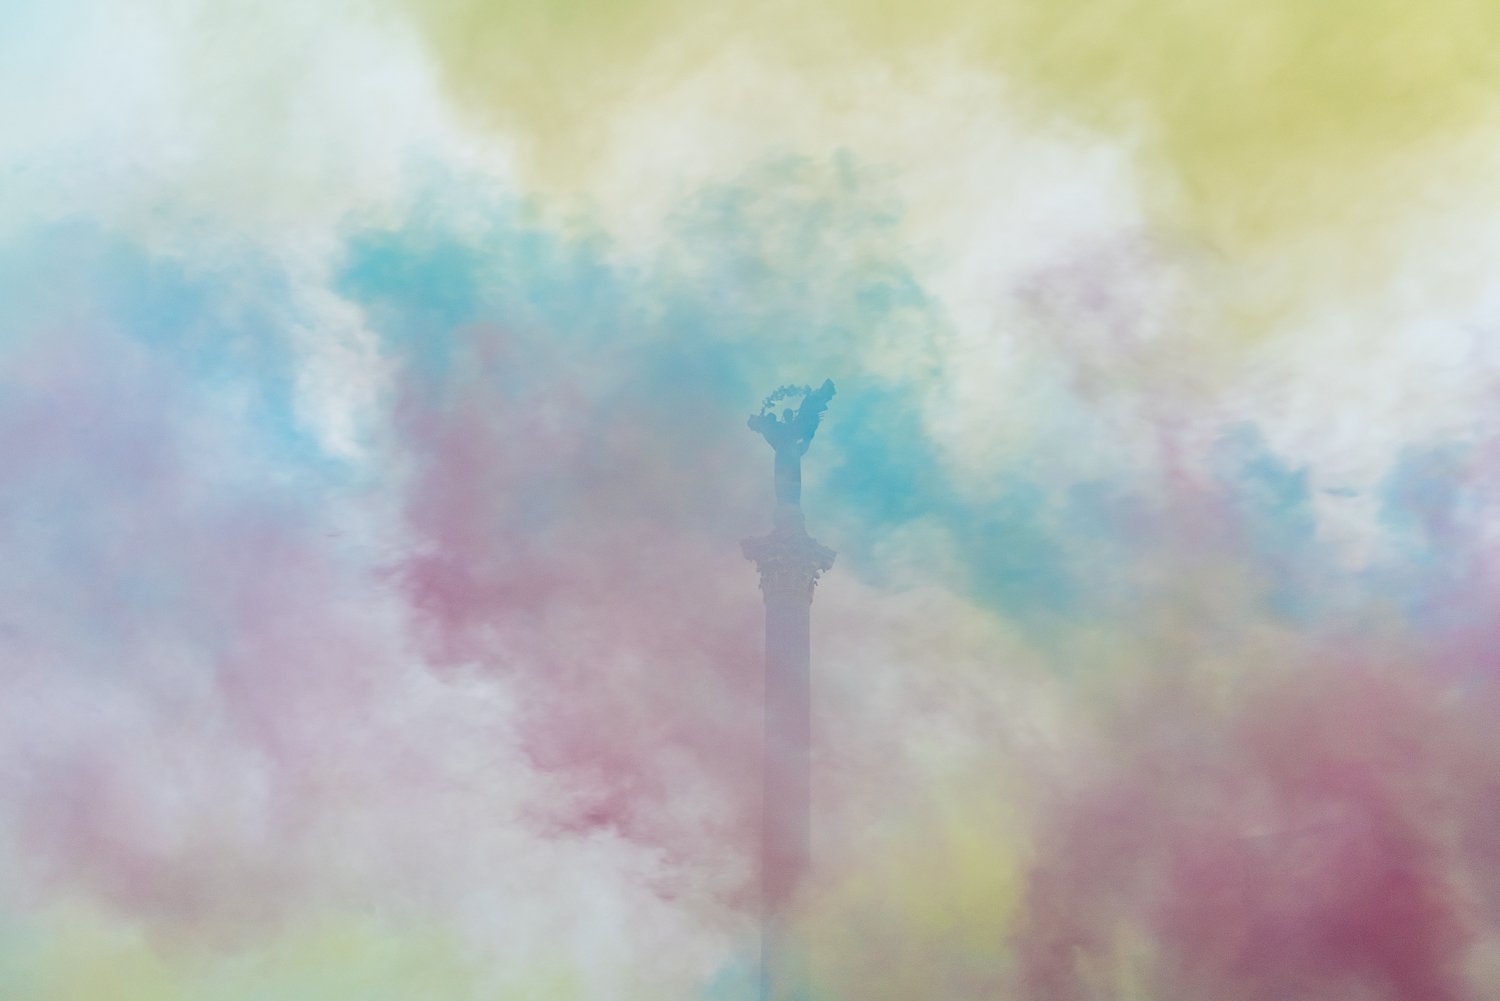  Colored smoke from signal flares obscures the independence monument in the center of Maidan Nezalezhnosti, or Independence Square, during a rally and march held by family members and other supporters of Ukrainian soldiers and civilians being held pr